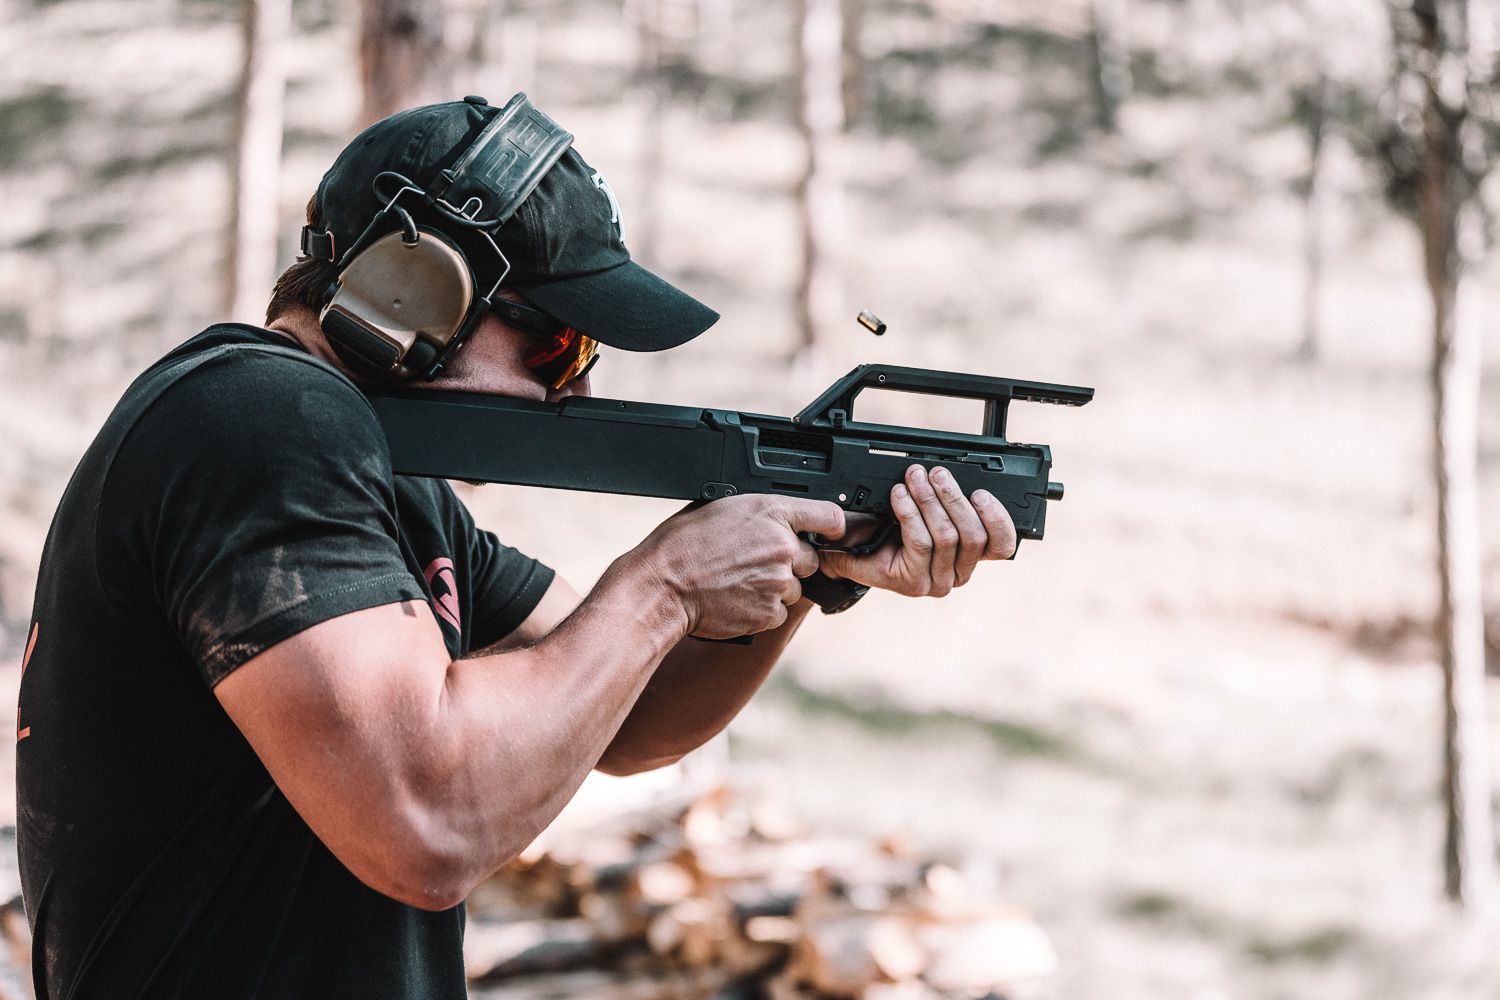 A shooter with the new ZEV FDP carbine